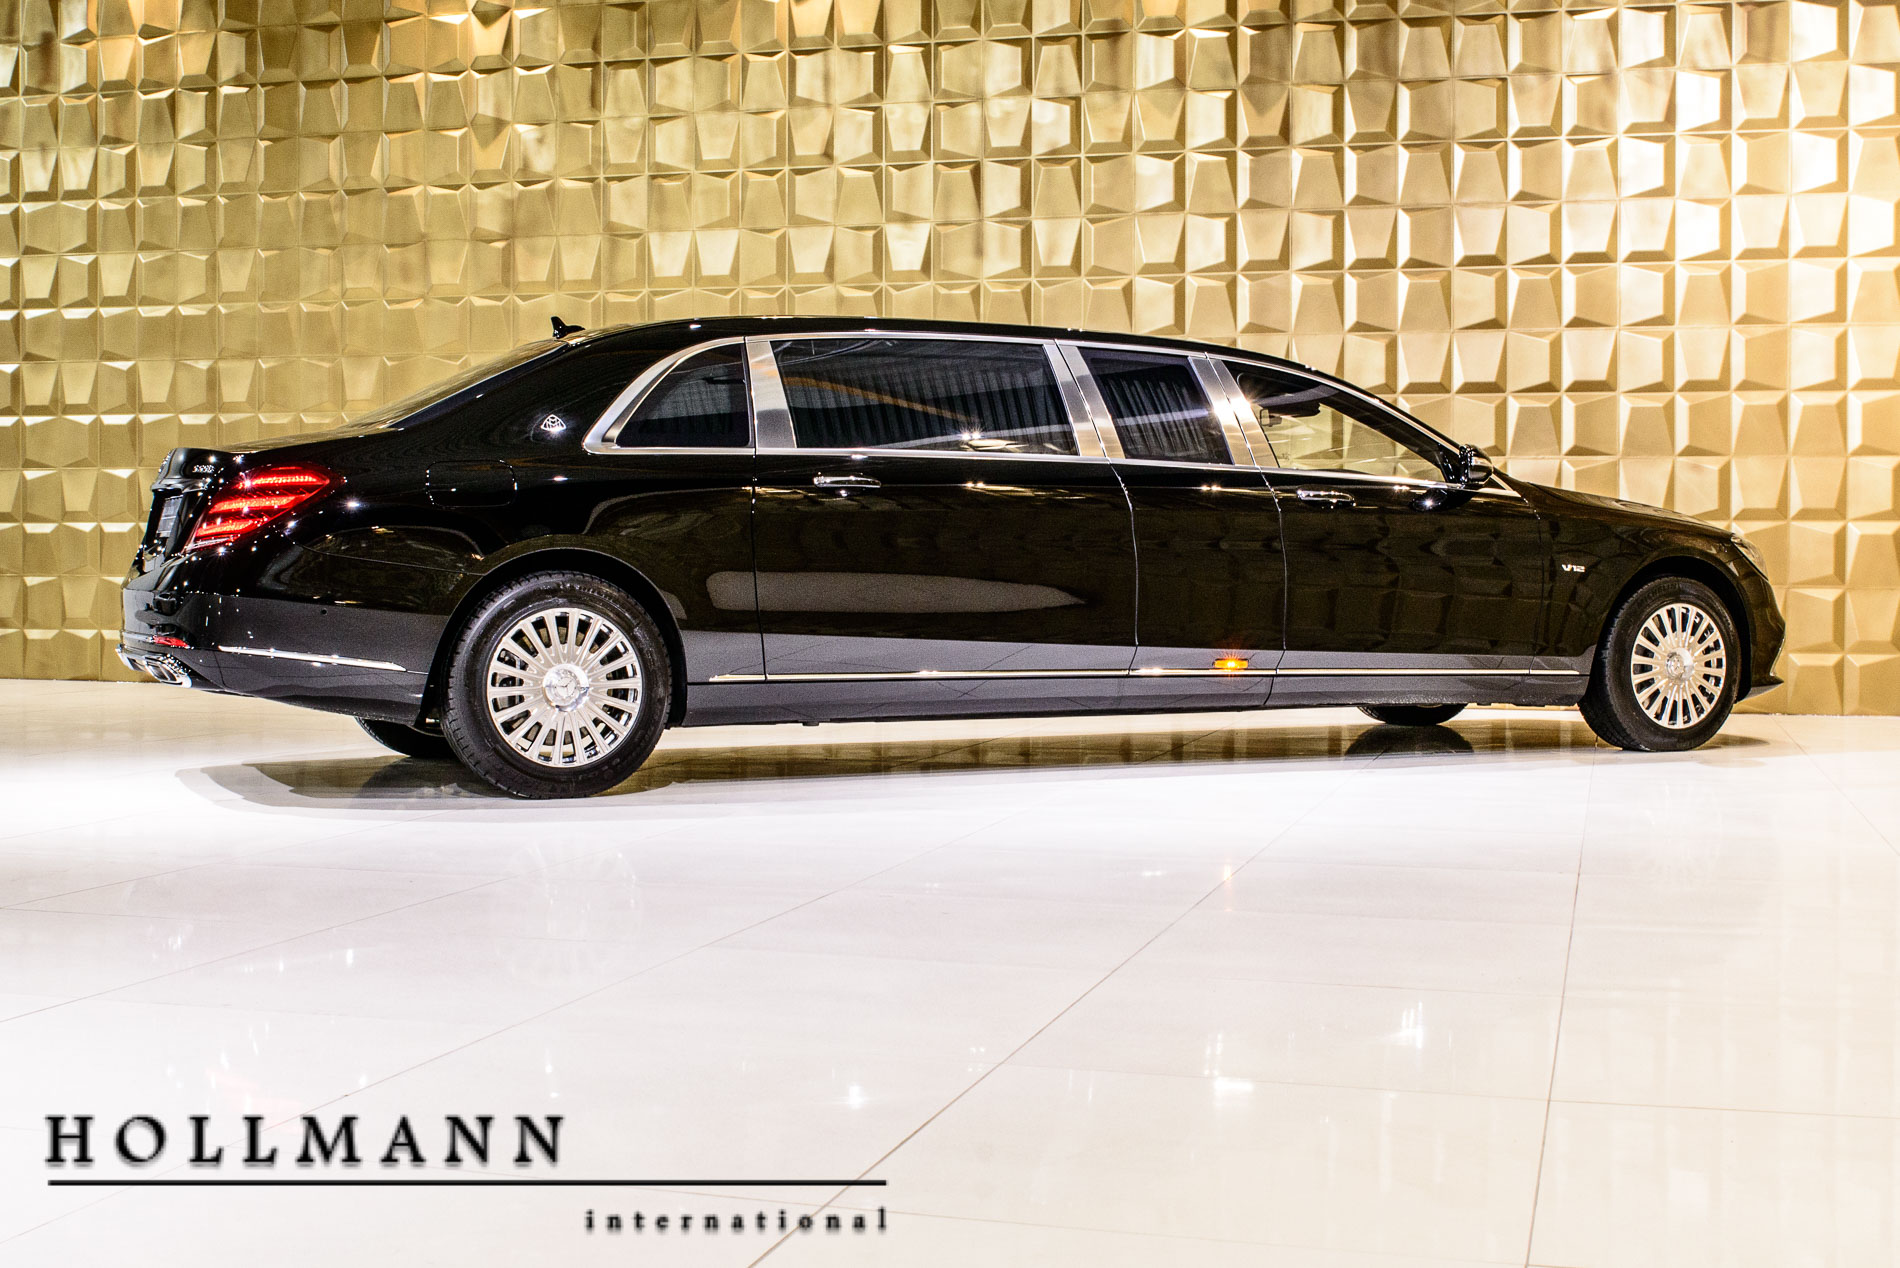 Mercedes Maybach S 600 Pullman Luxury Pulse Cars Germany For Sale On Luxurypulse